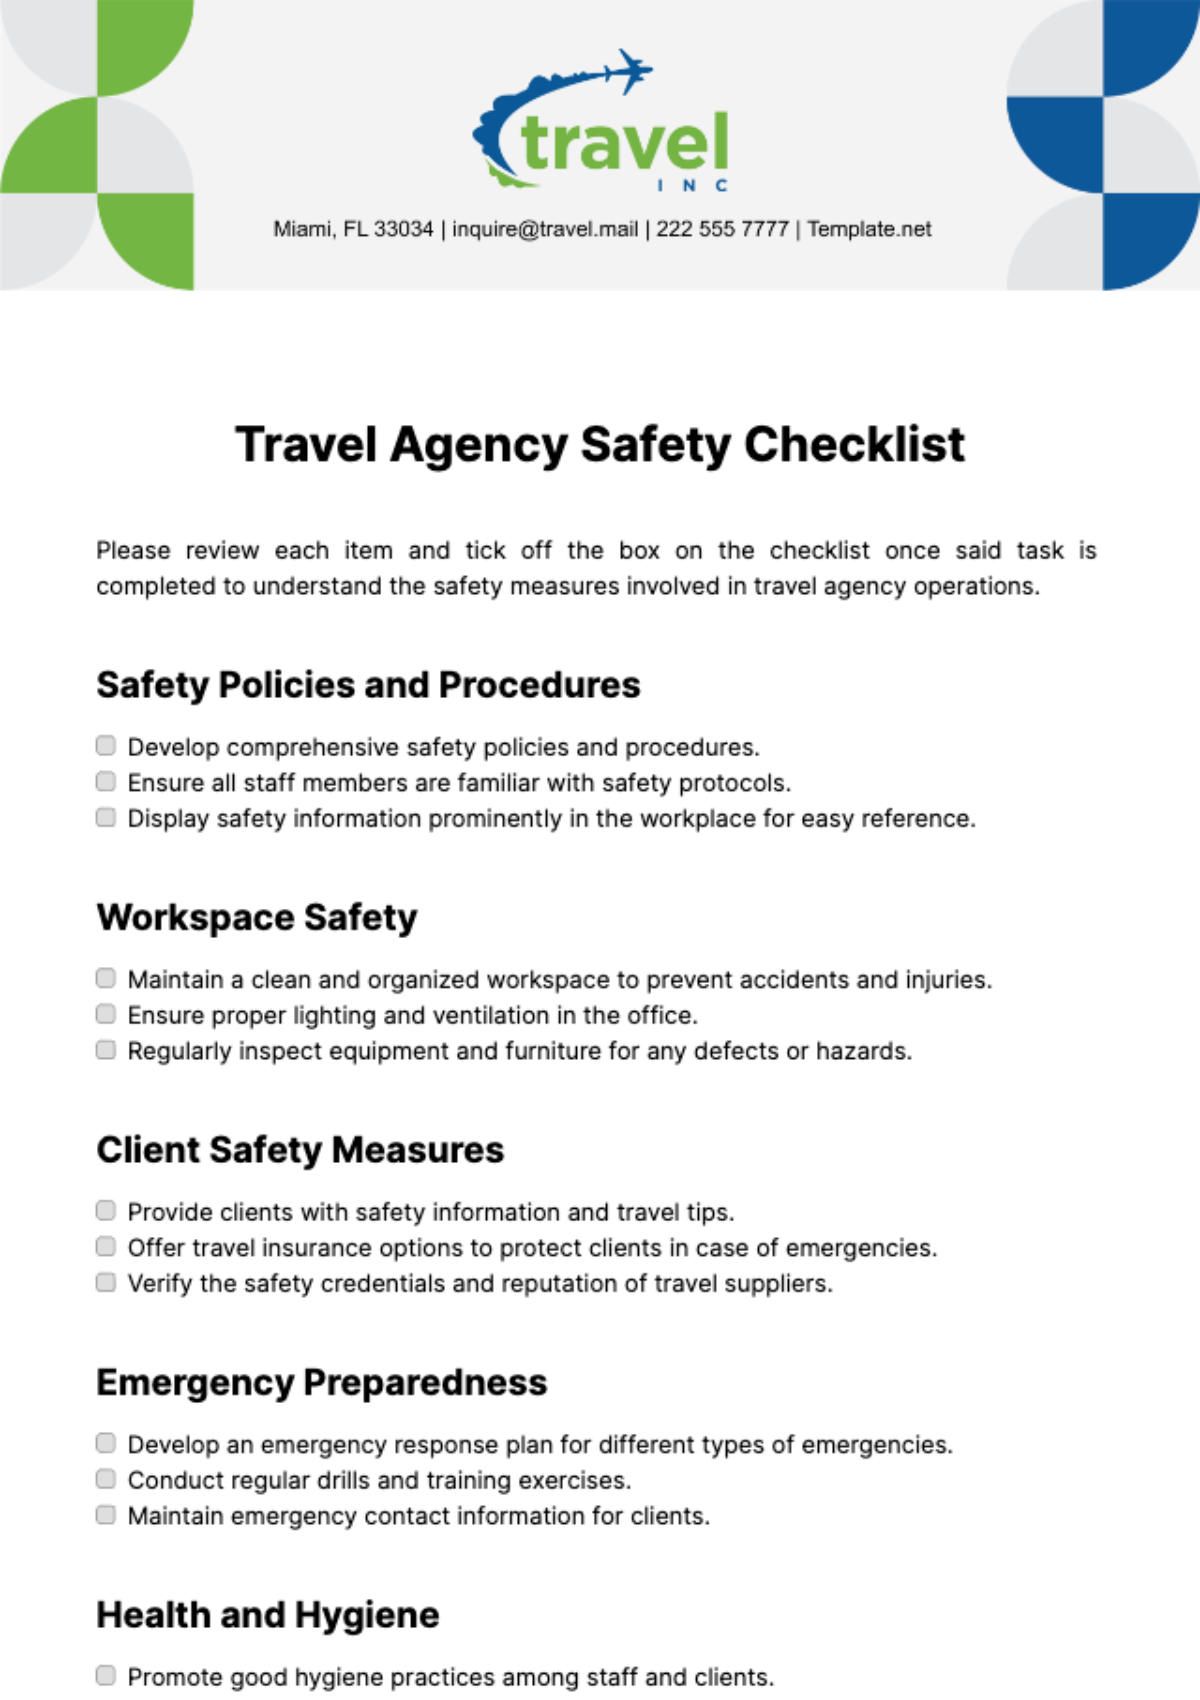 Travel Agency Safety Checklist Template